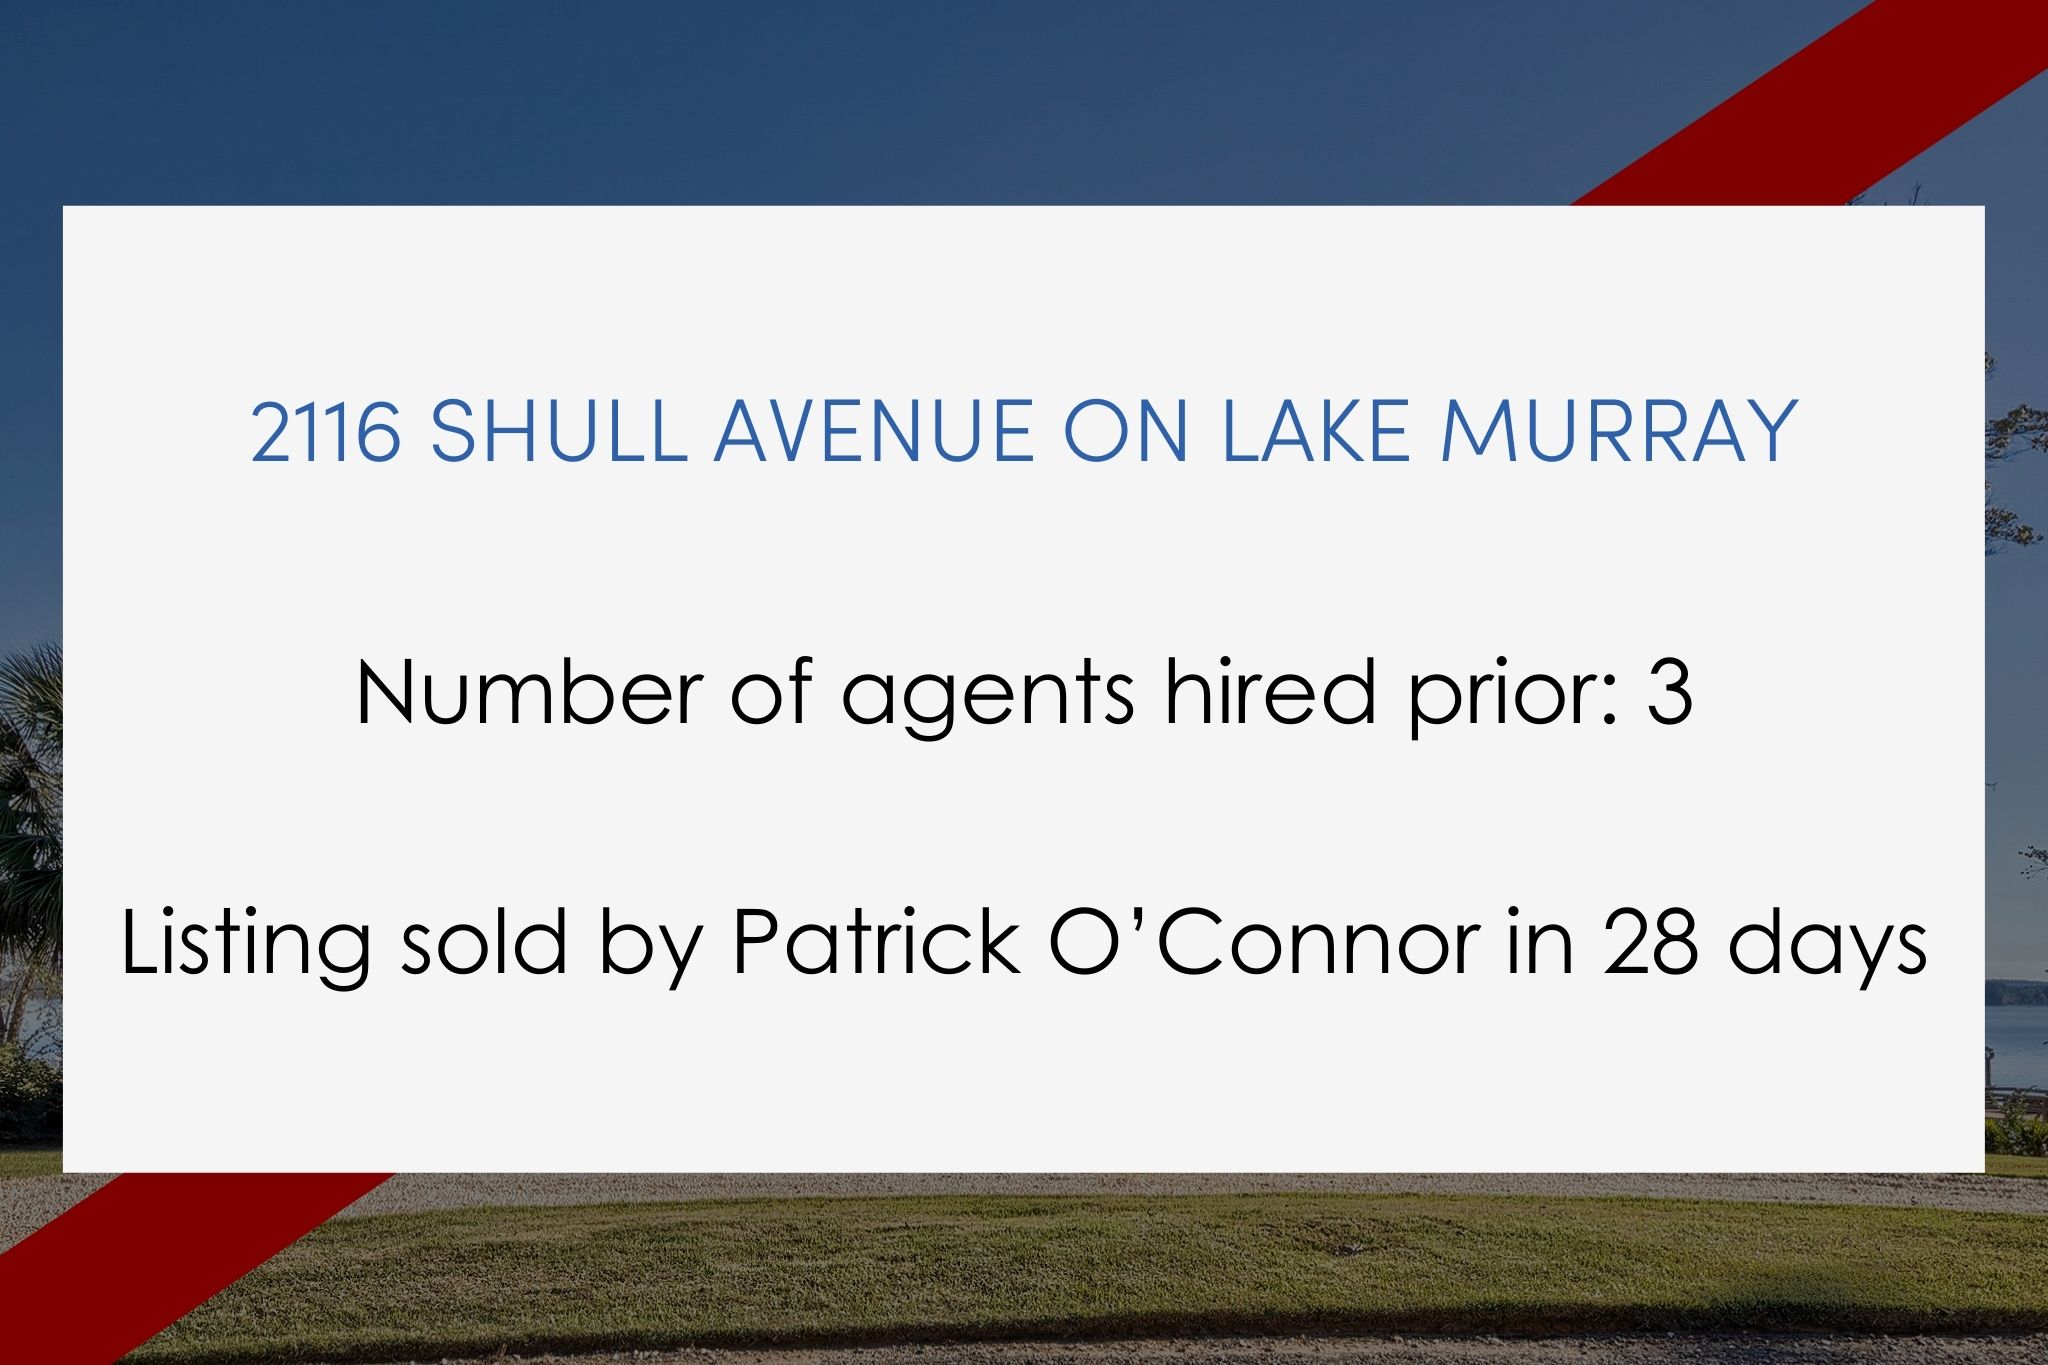 Number of agents hired prior: 3. Listing sold by Patrick O’Connor in 28 days.